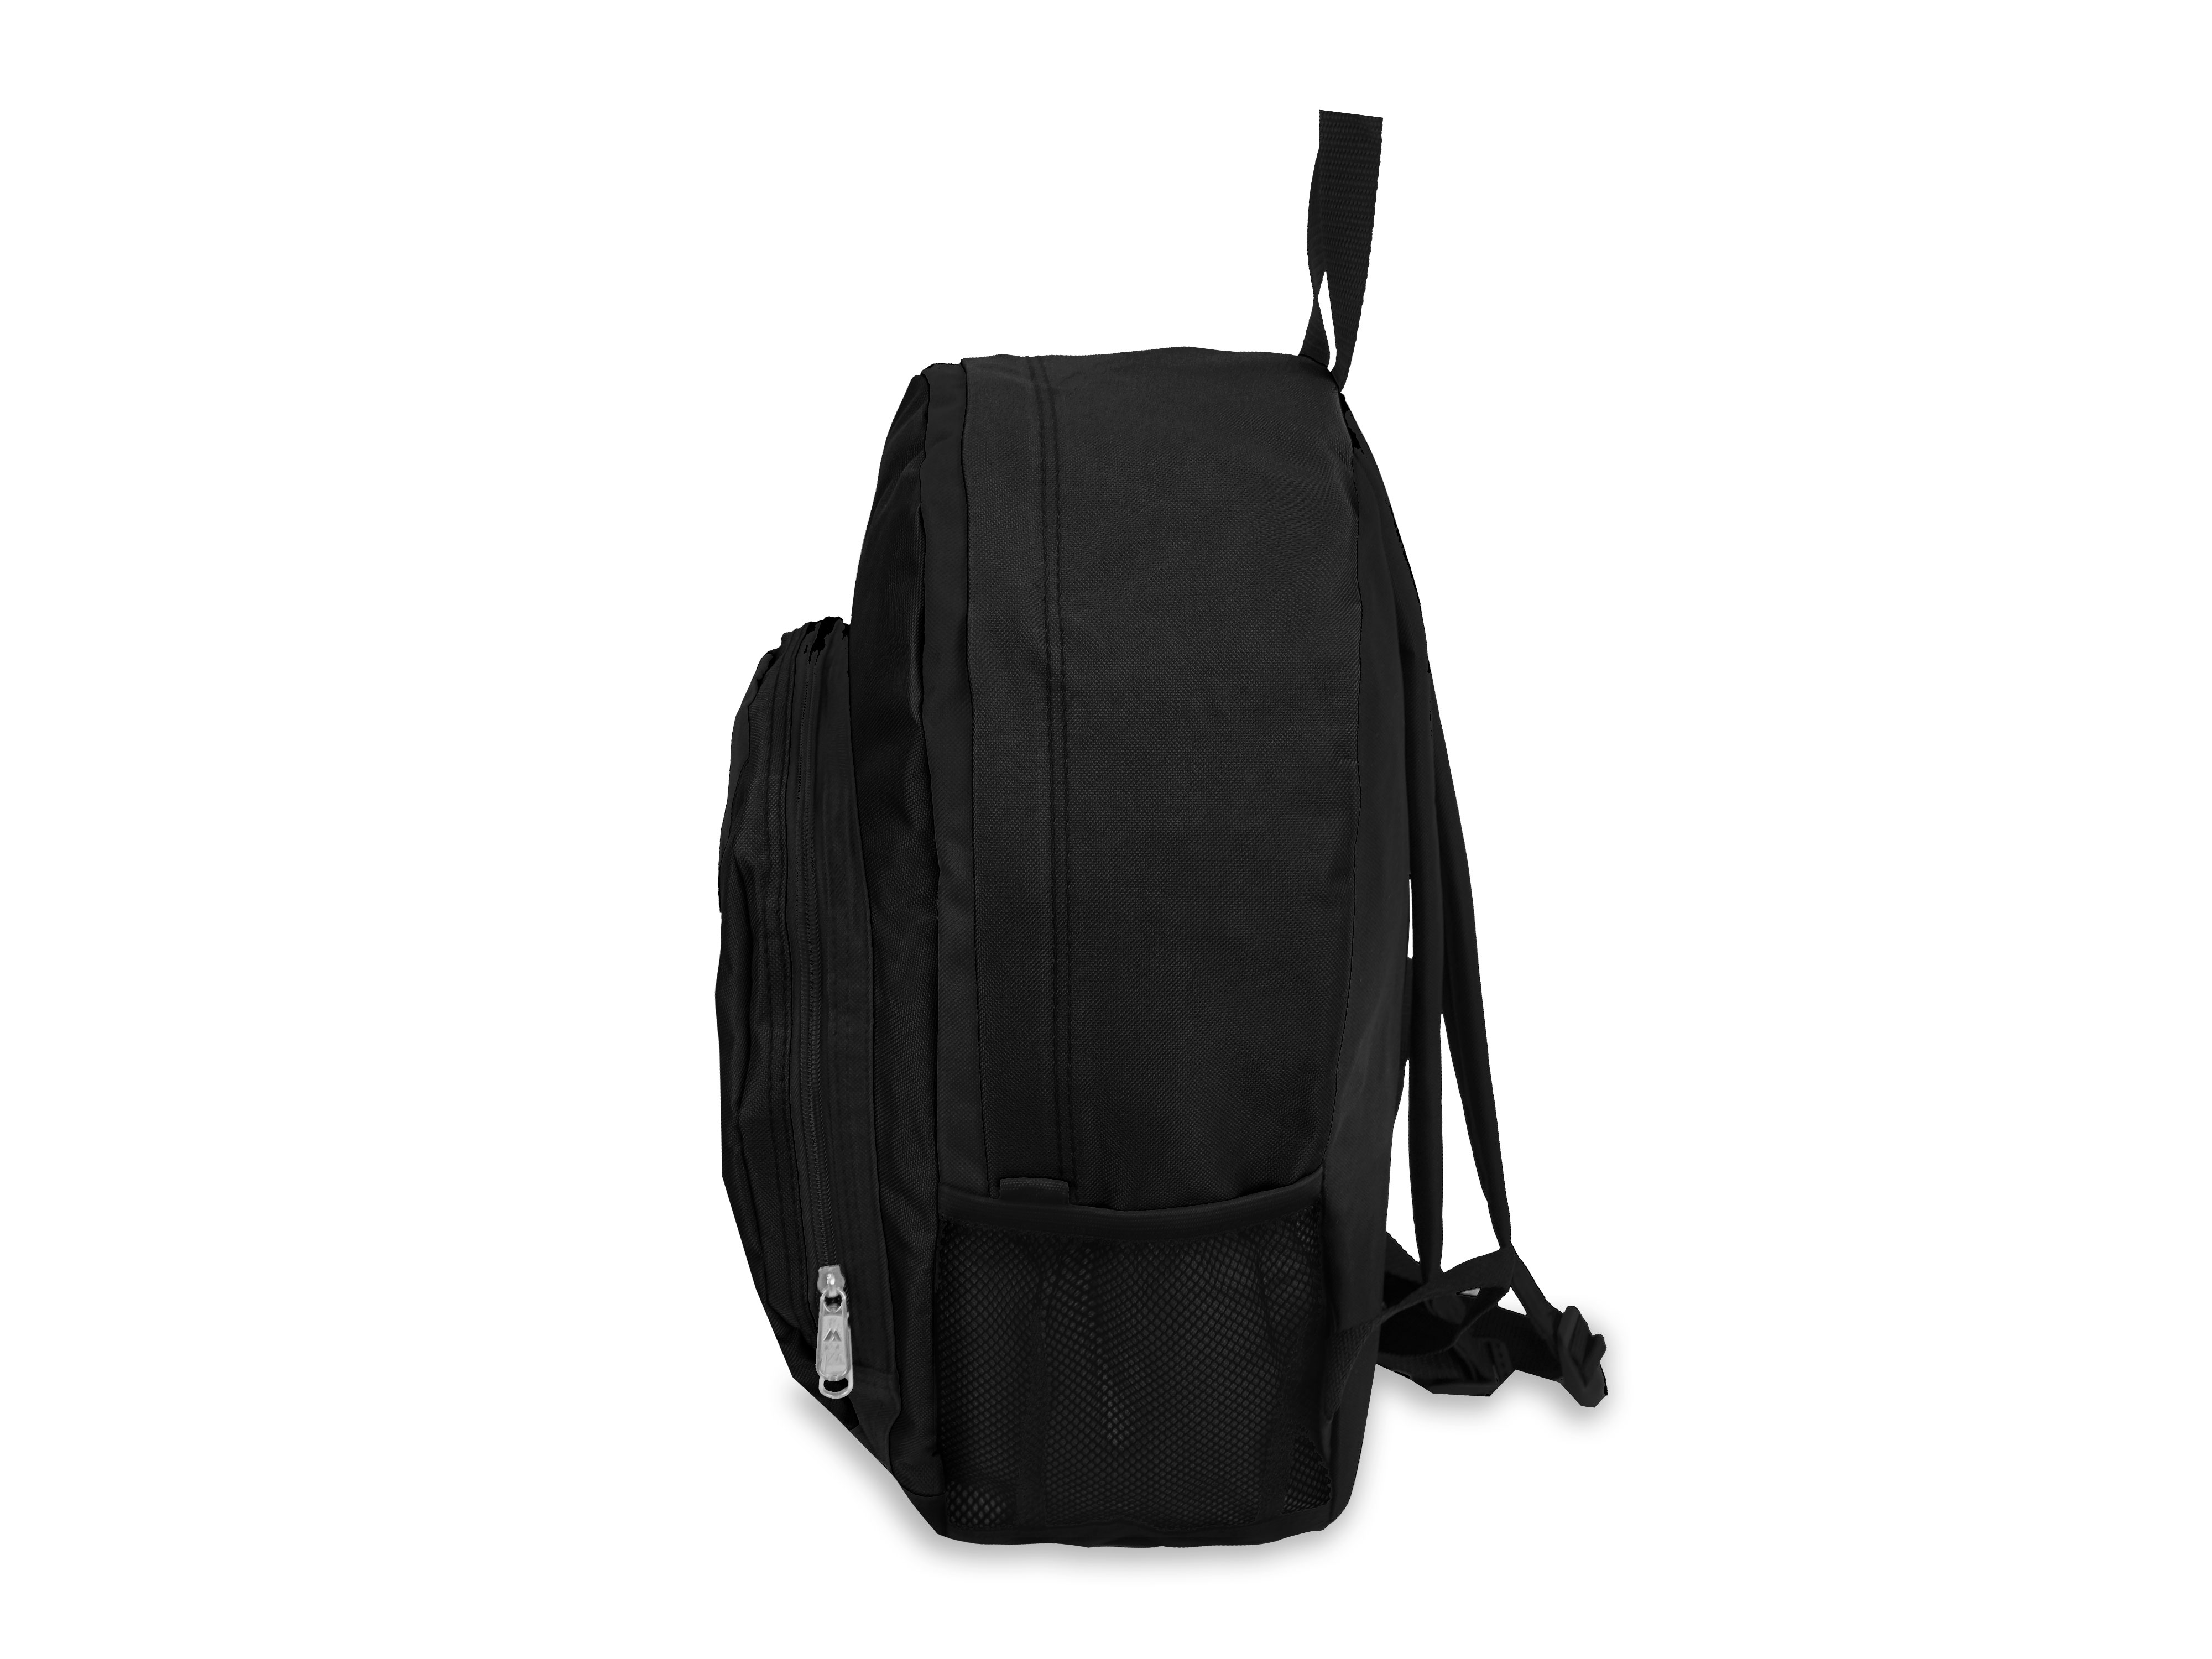 Everest Unisex Backpack with Front and Side Pockets, Black - image 4 of 4